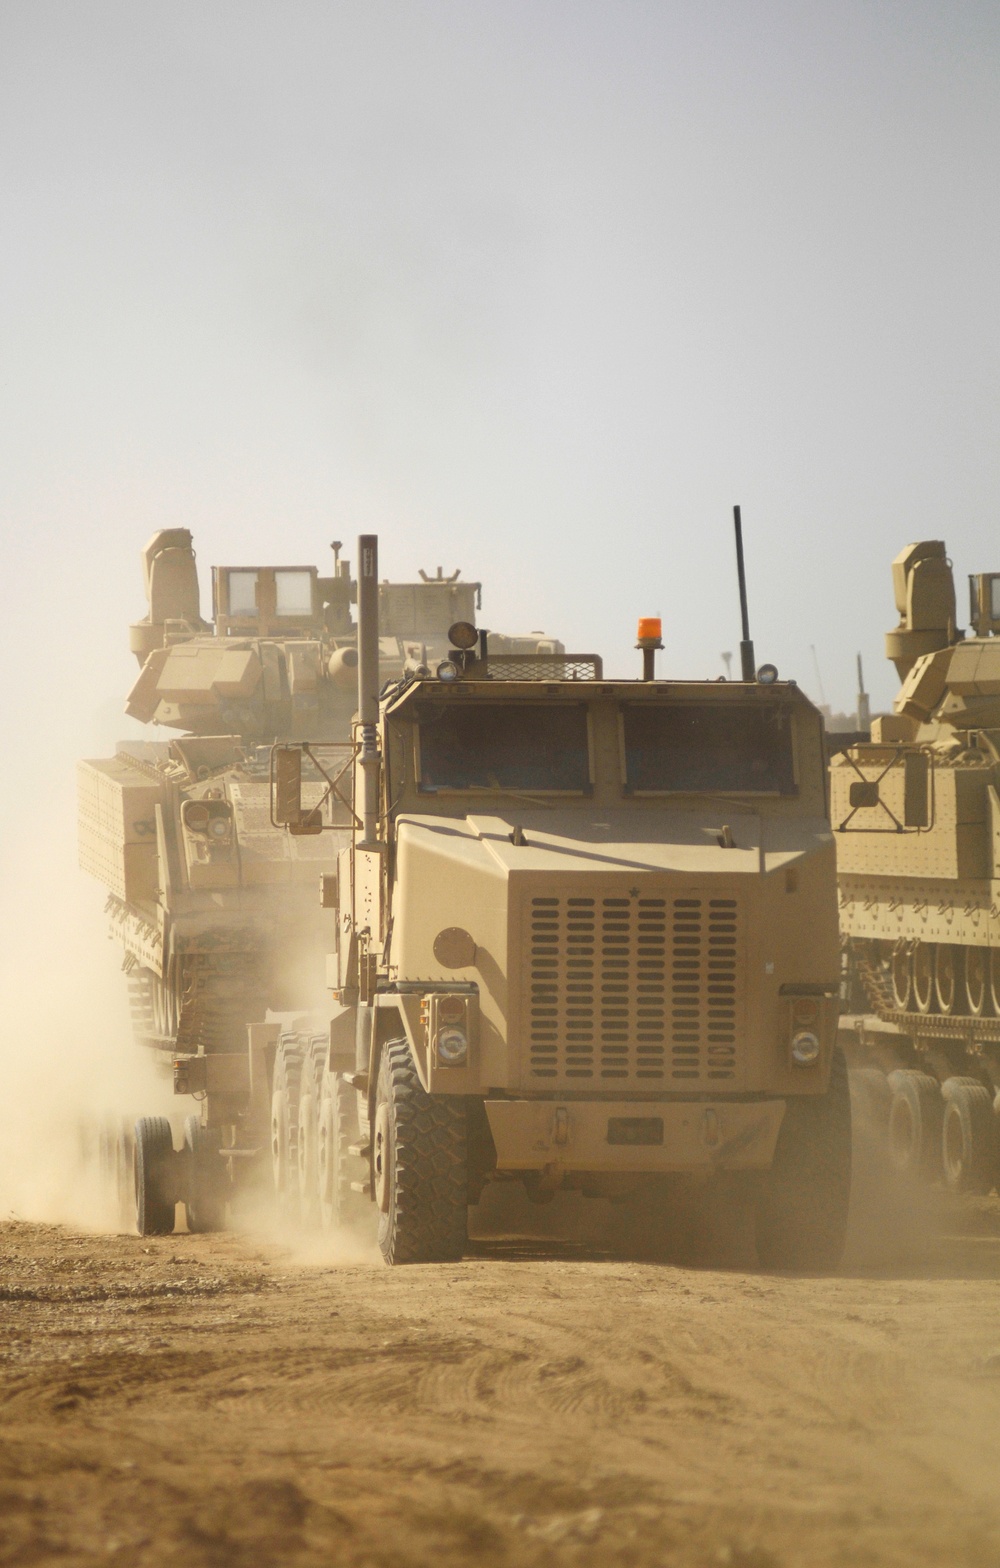 Soldiers load convoy